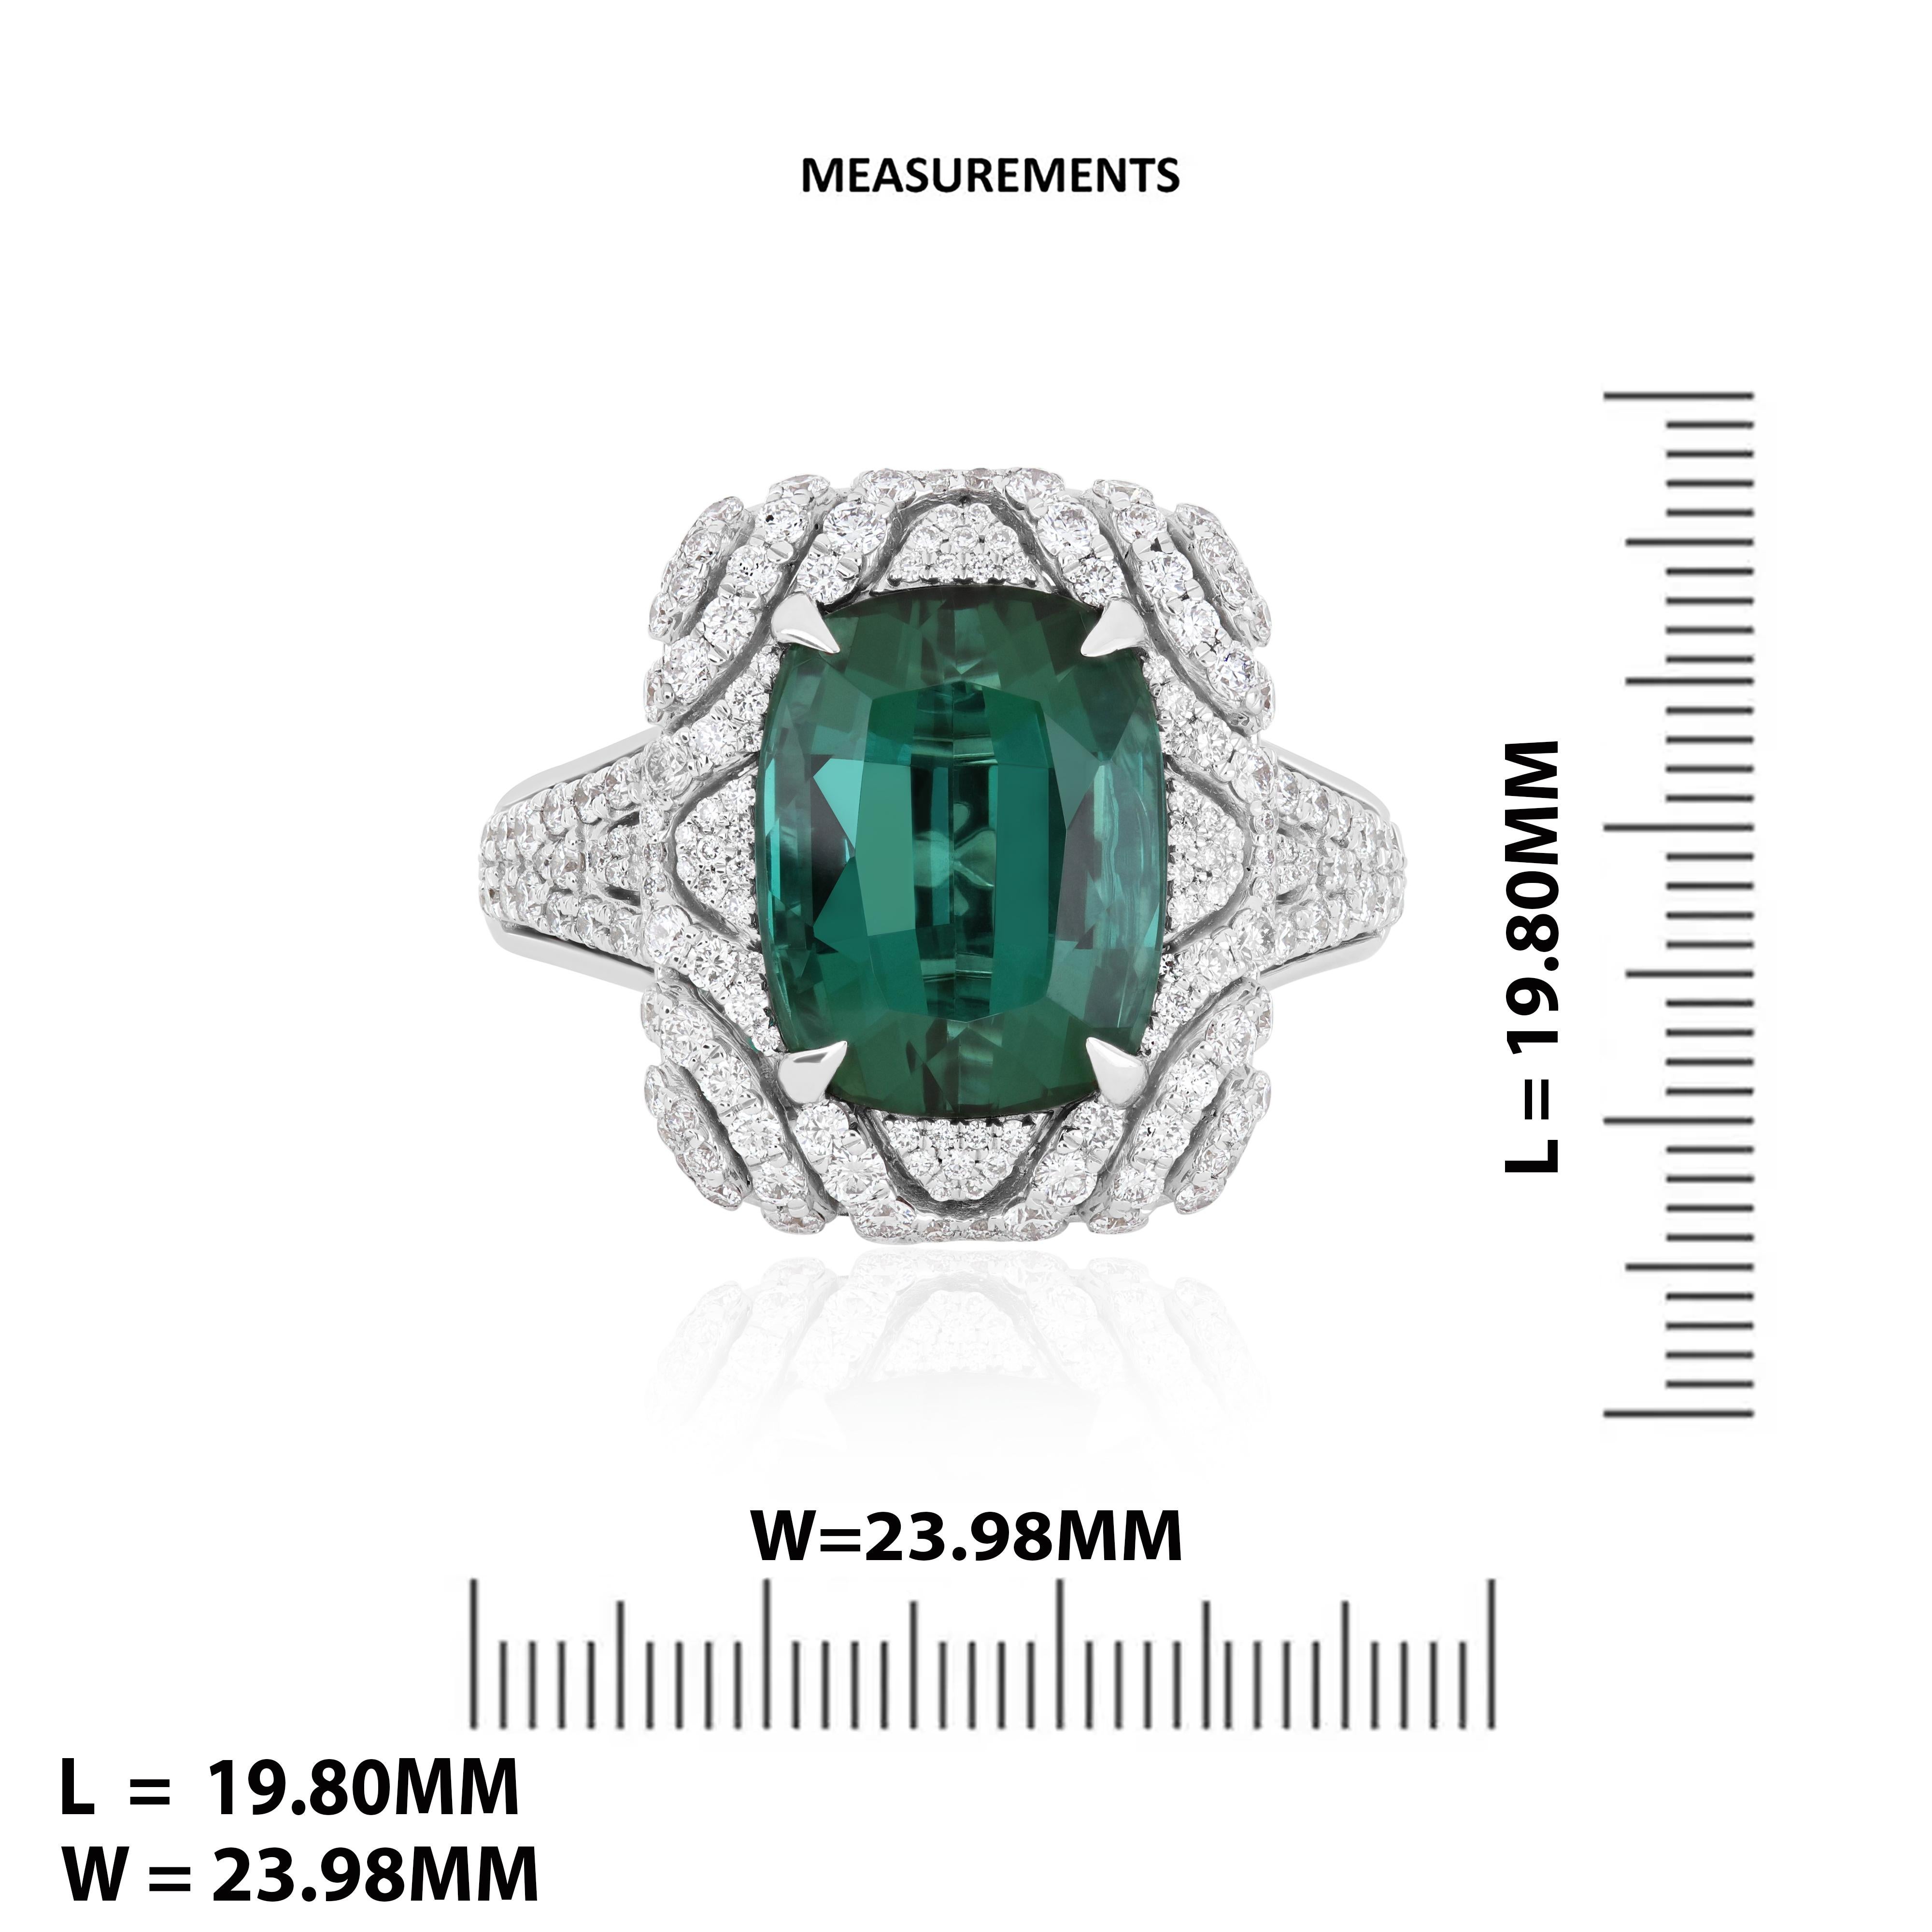 8.7 Carat Green Tourmaline and Diamond Studded Ring in 18K White Gold For Sale 2